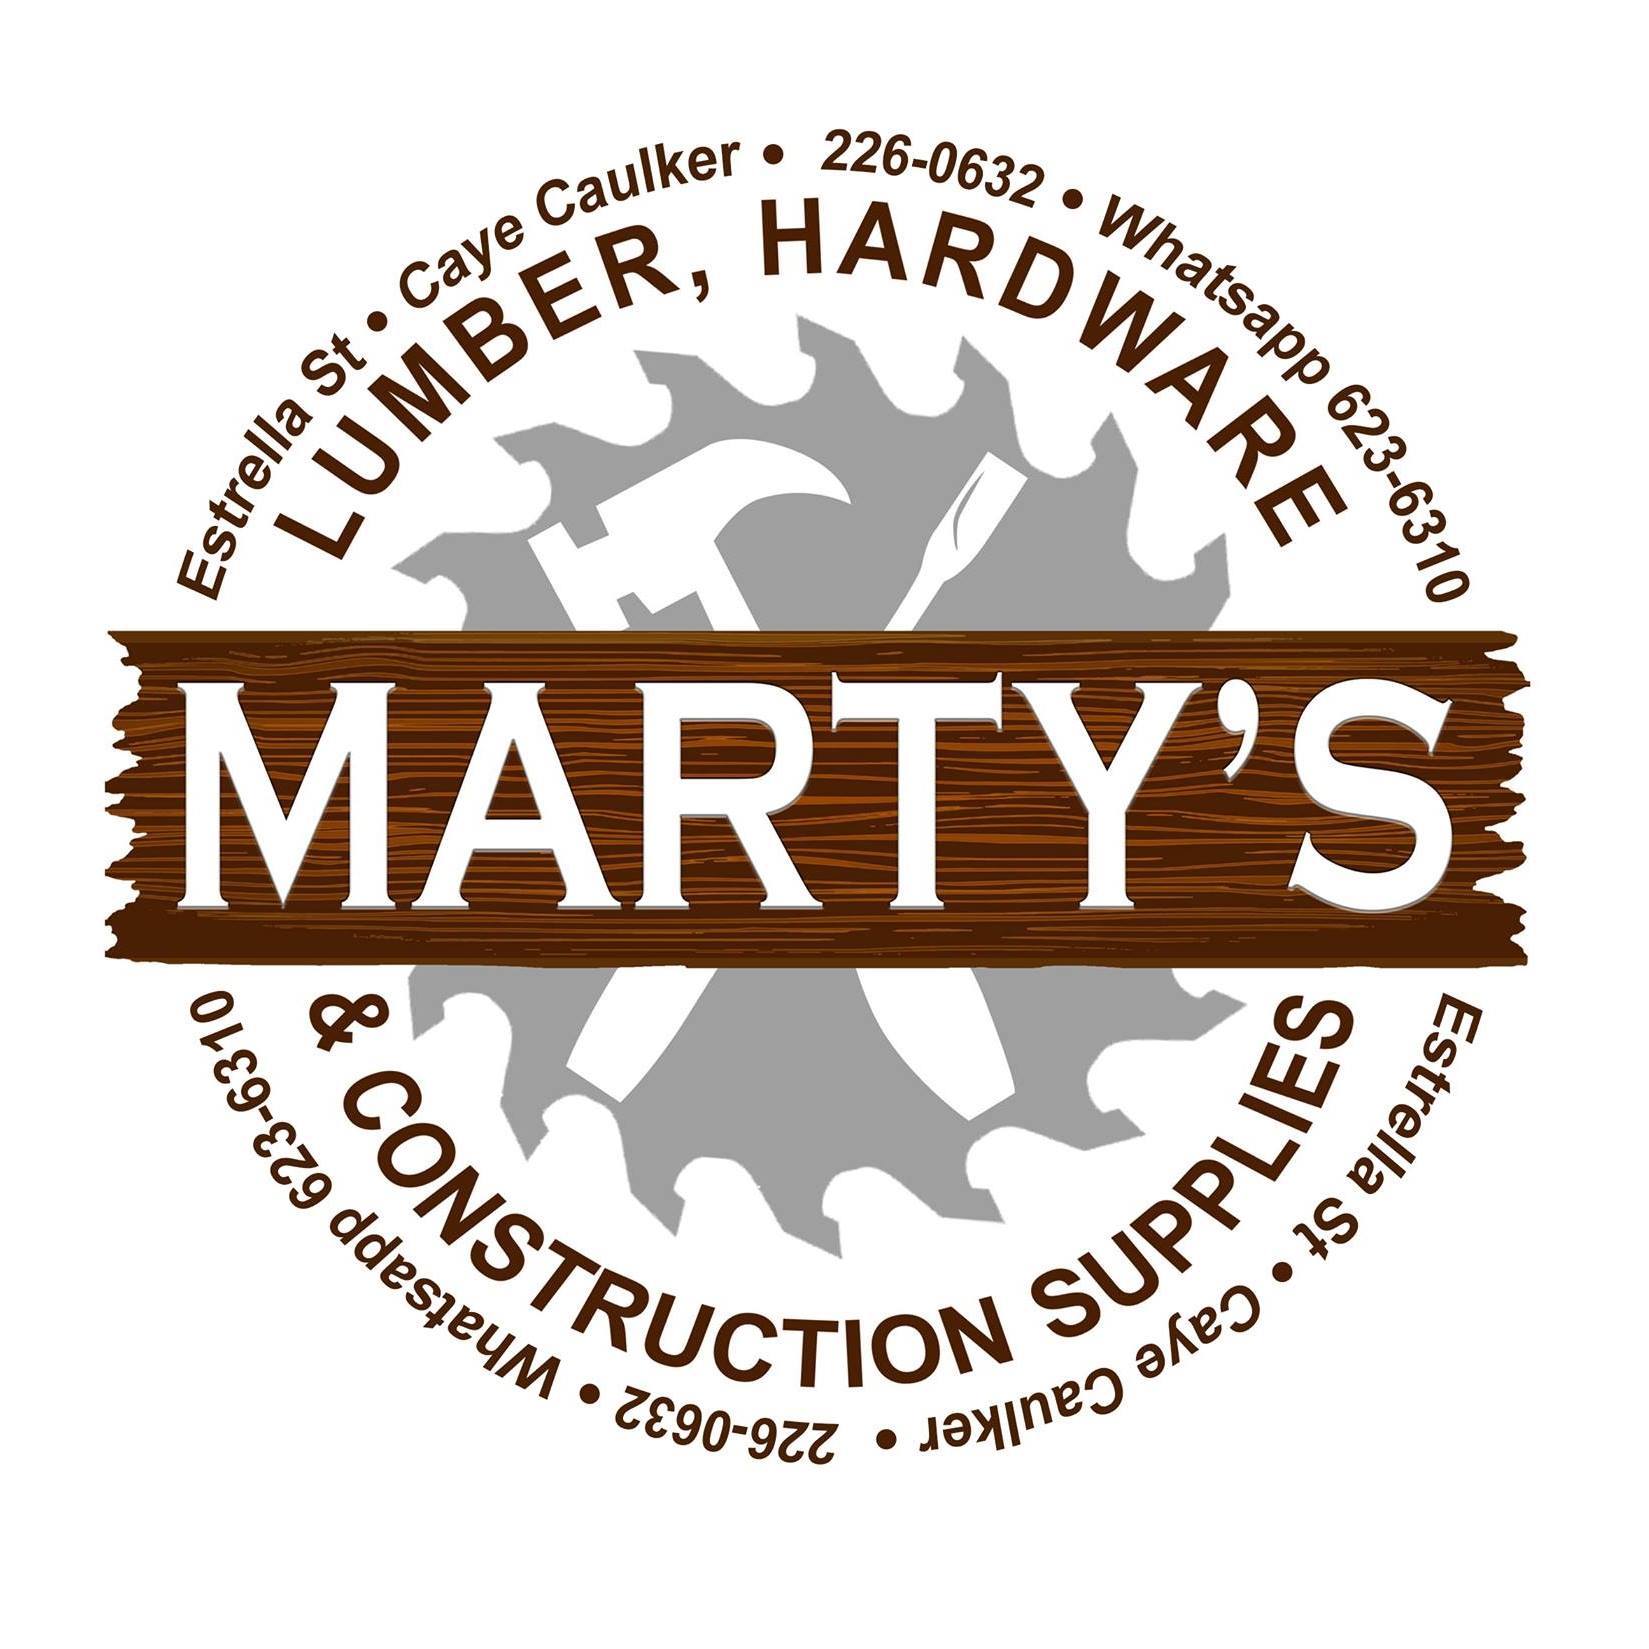 Marty's Lumber, Hardware & Construction Supply - Belize, Central America